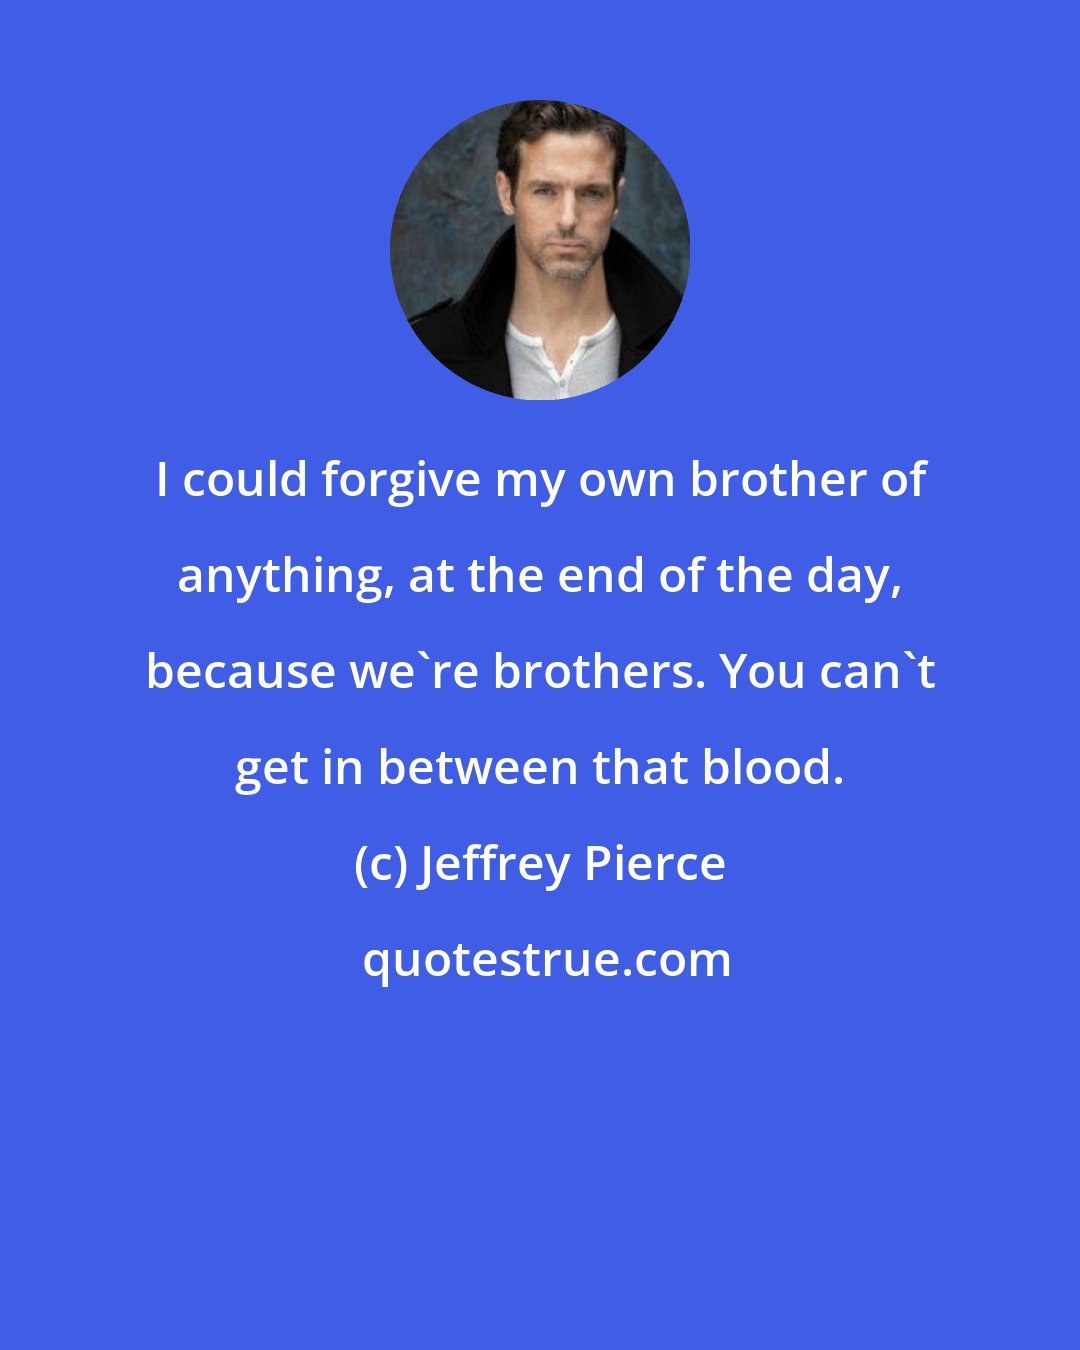 Jeffrey Pierce: I could forgive my own brother of anything, at the end of the day, because we're brothers. You can't get in between that blood.